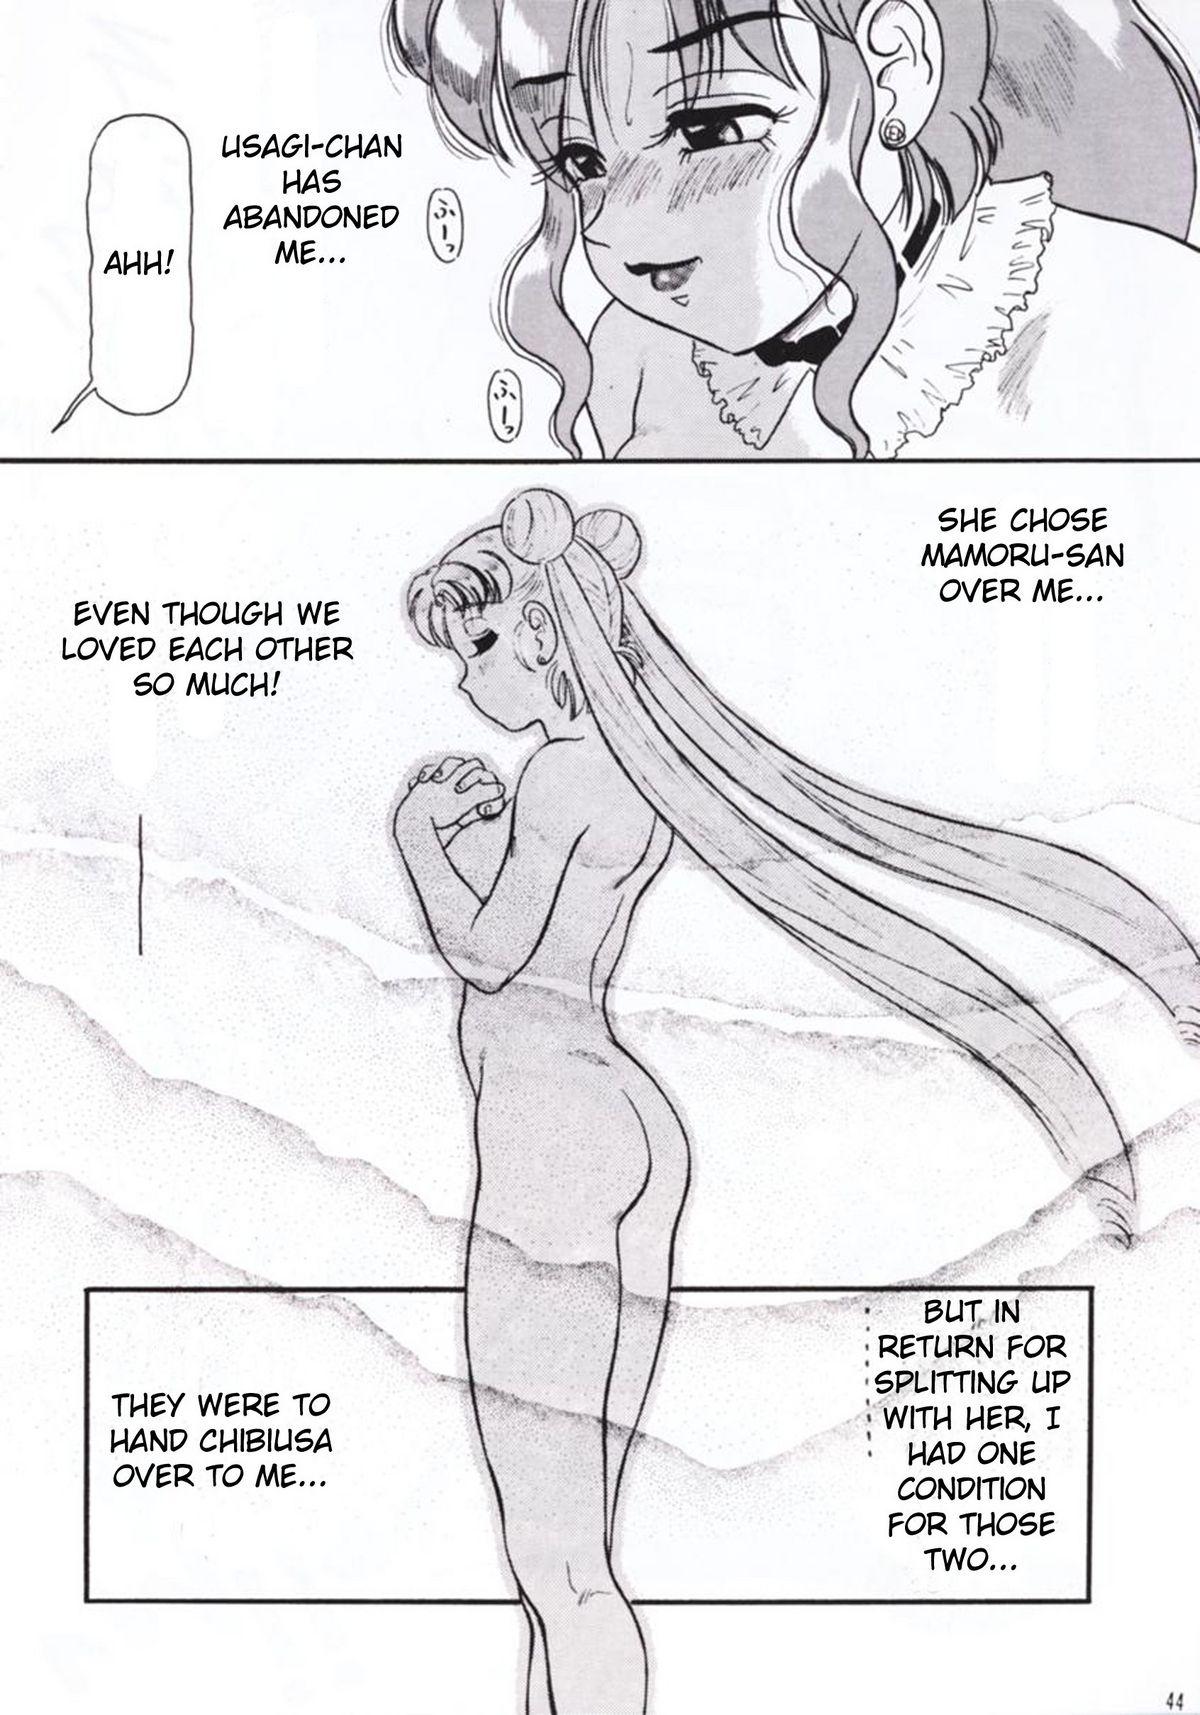 Transex Lover's Blue - Sailor moon Spread - Page 11